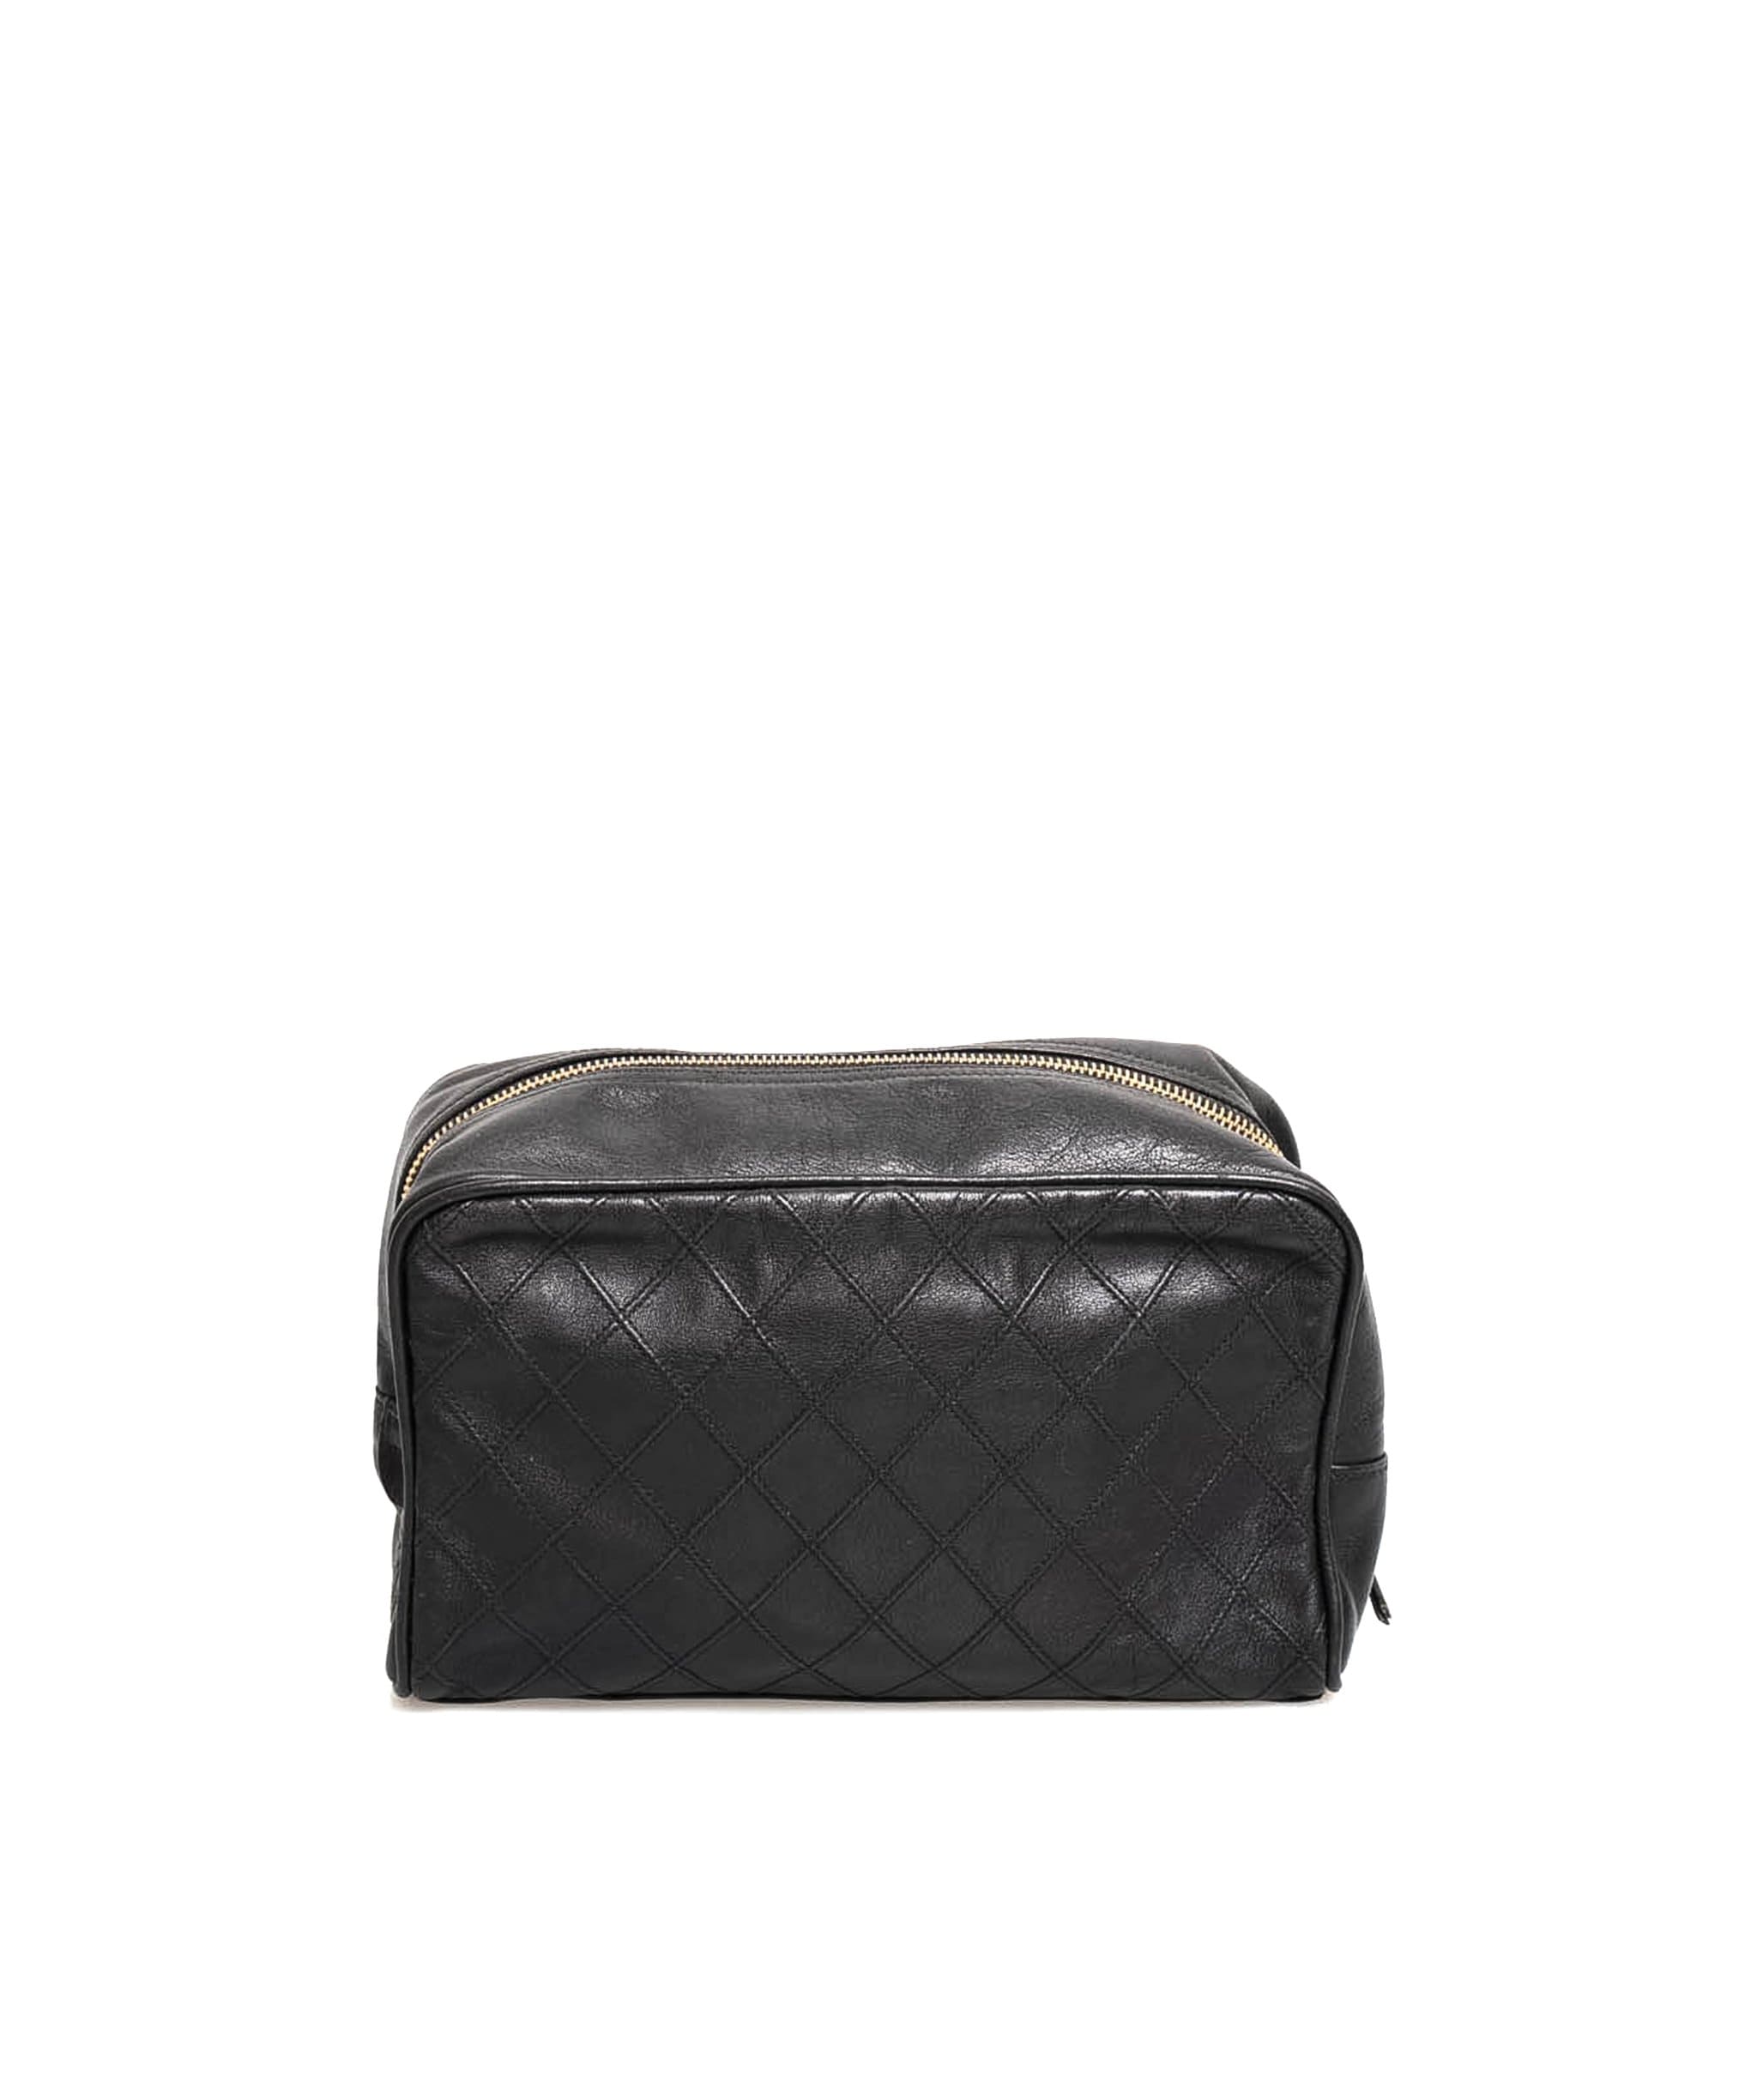 Chanel Chanel Side CC Toiletry Pouch Bag - AWL1943